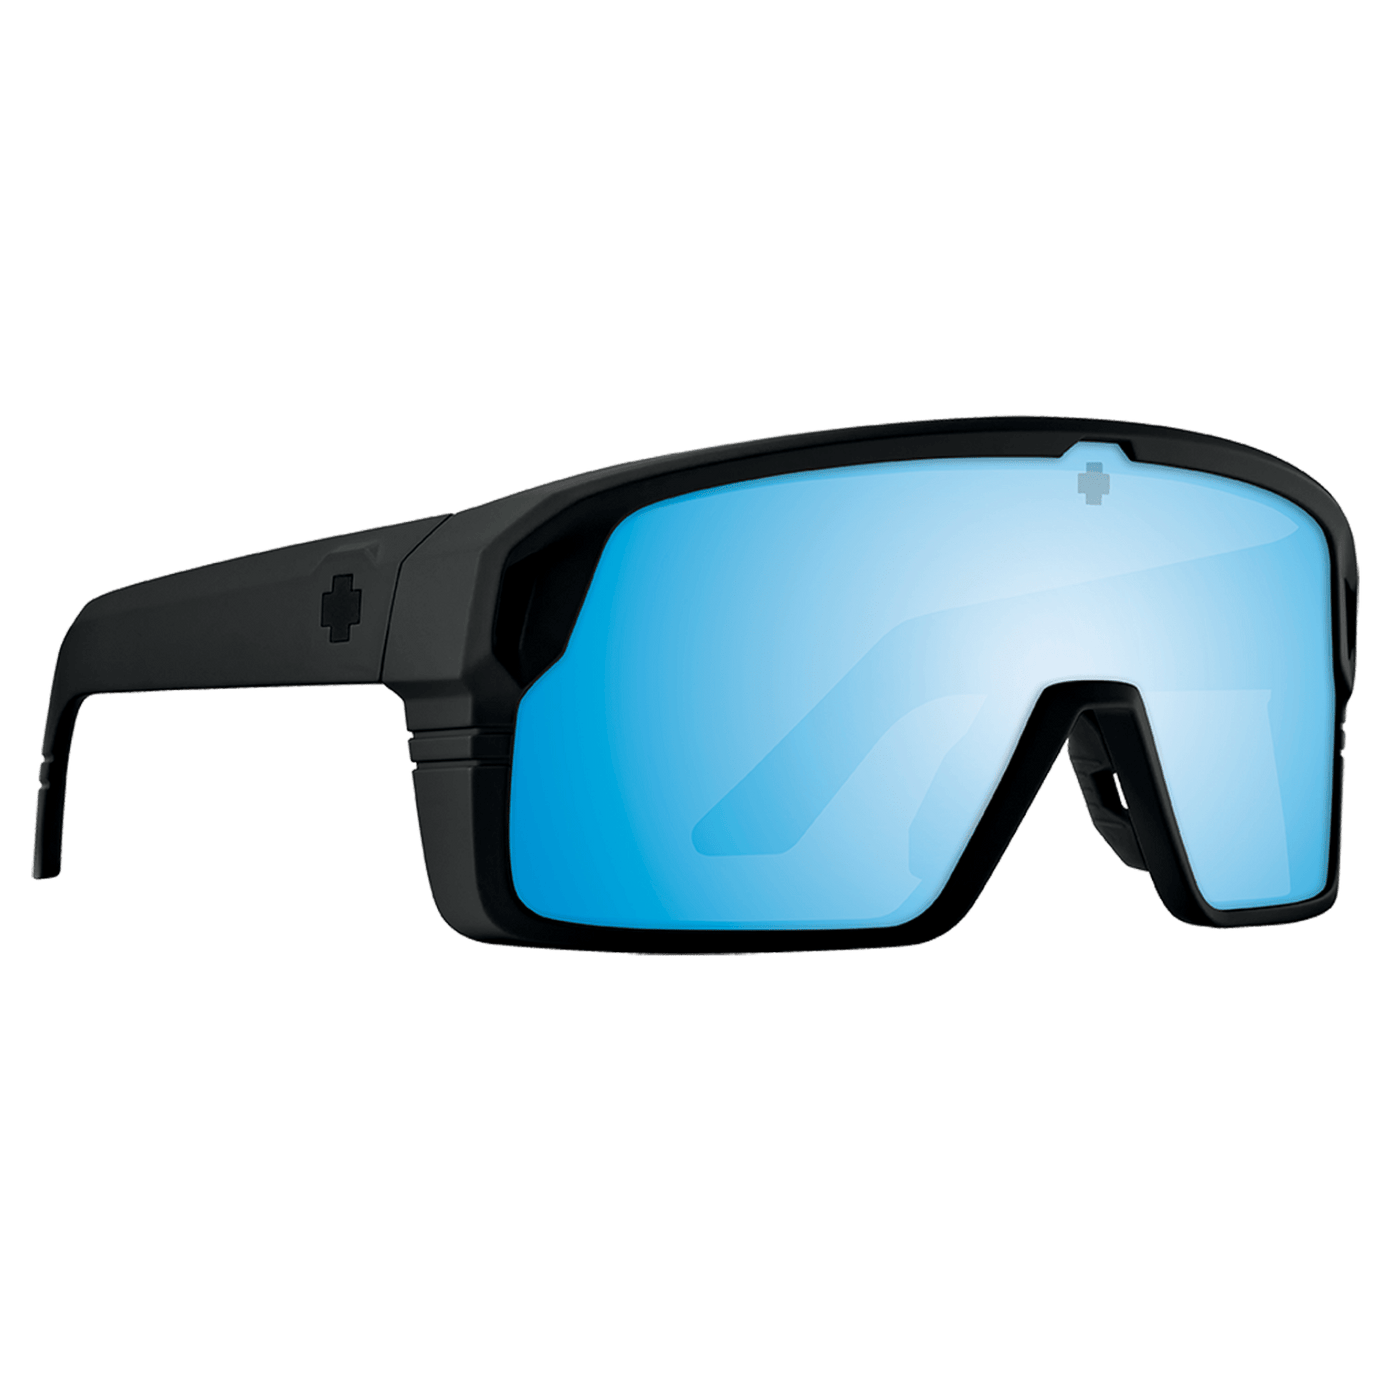 SPY MONOLITH Polarized Sunglasses, Happy BOOST - Blue 8Lines Shop - Fast Shipping